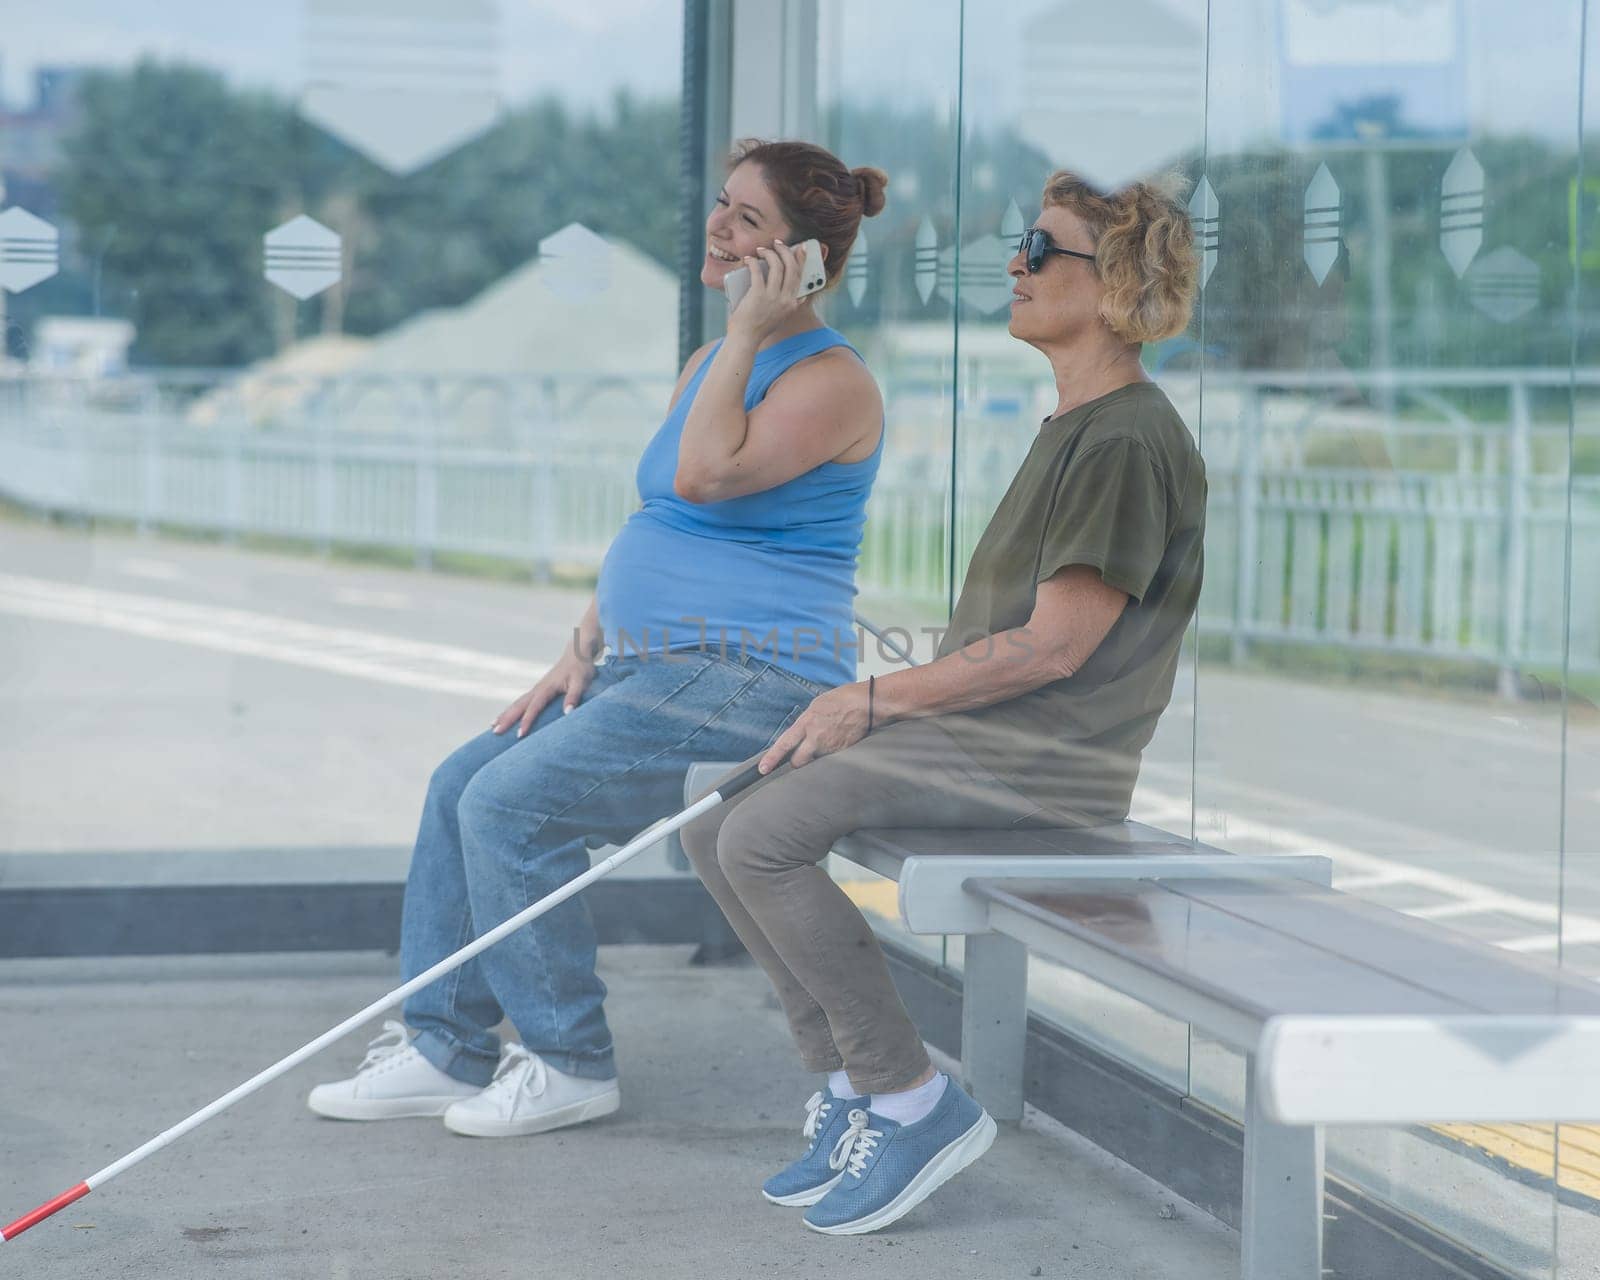 An elderly blind woman and a pregnant woman are sitting at a bus stop and waiting for the bus. by mrwed54